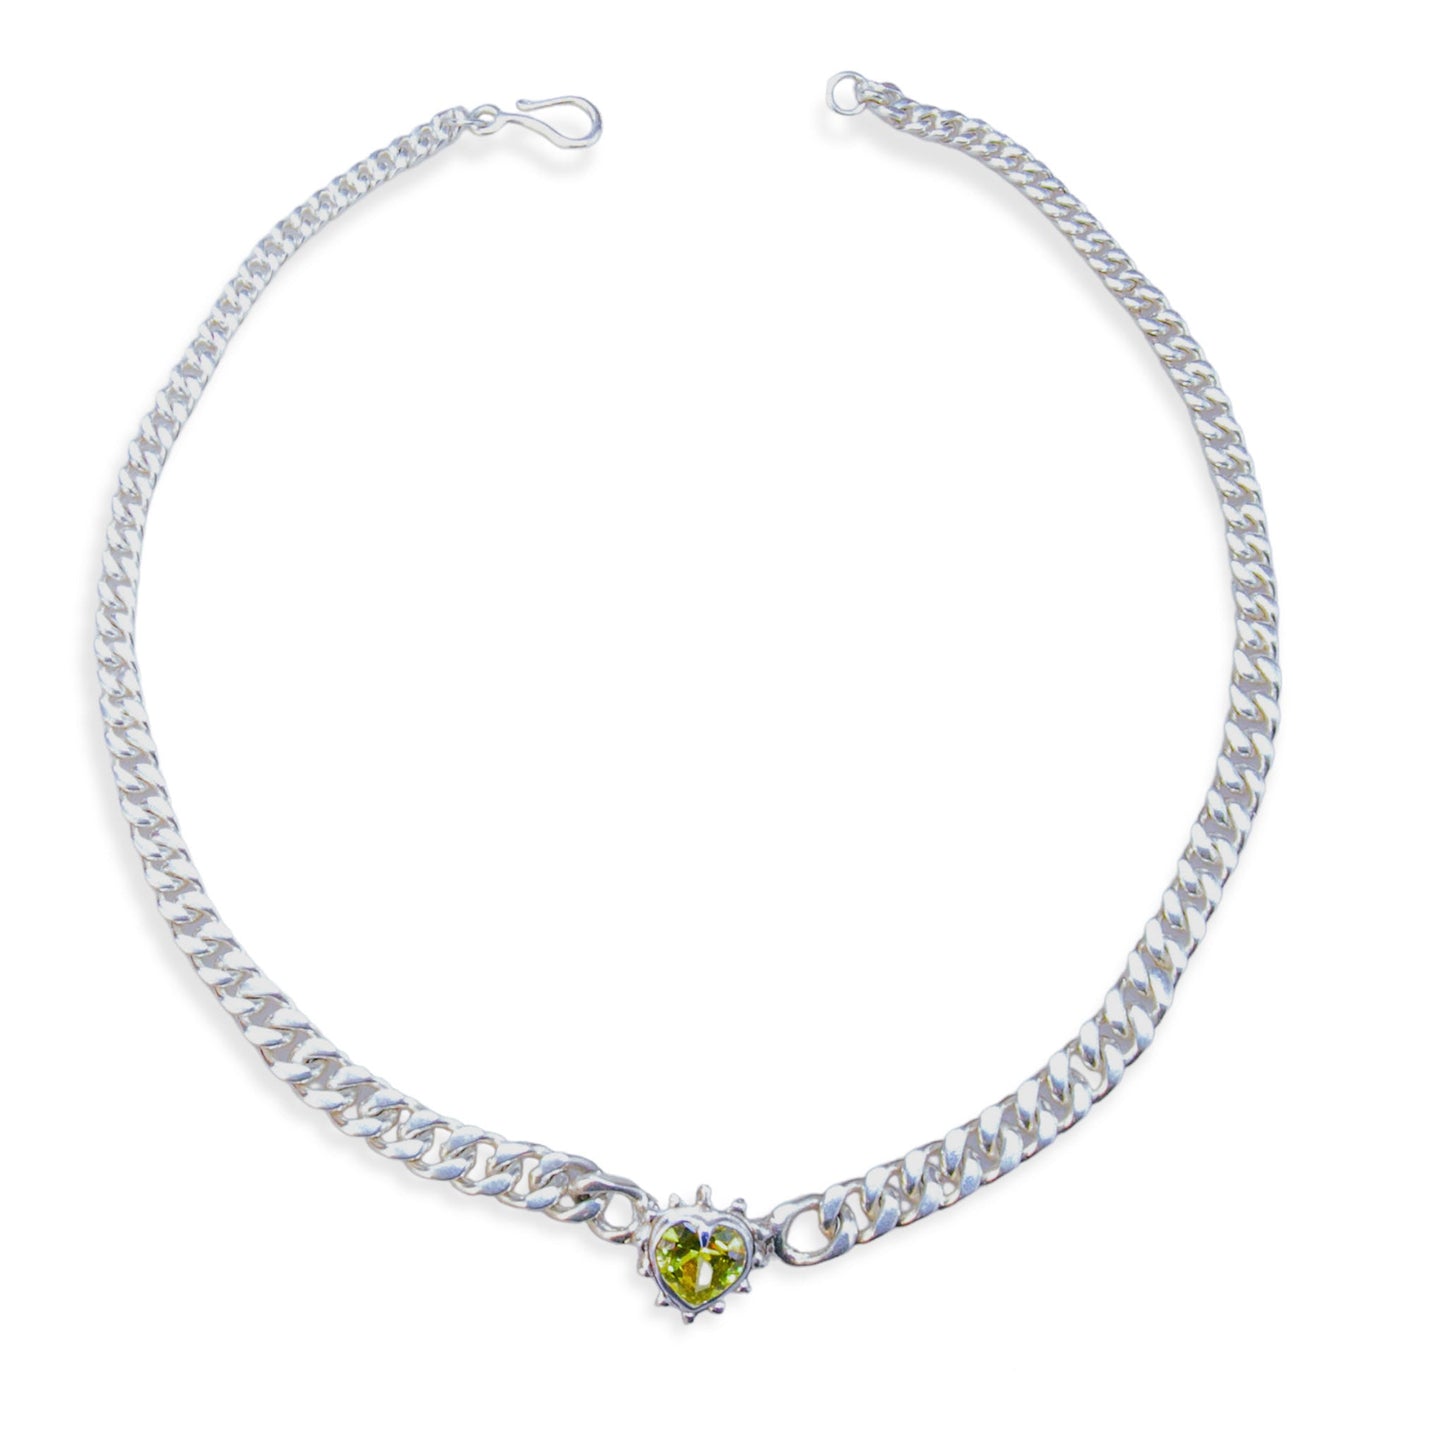 Limited Edition Lime Chained Heart Necklace